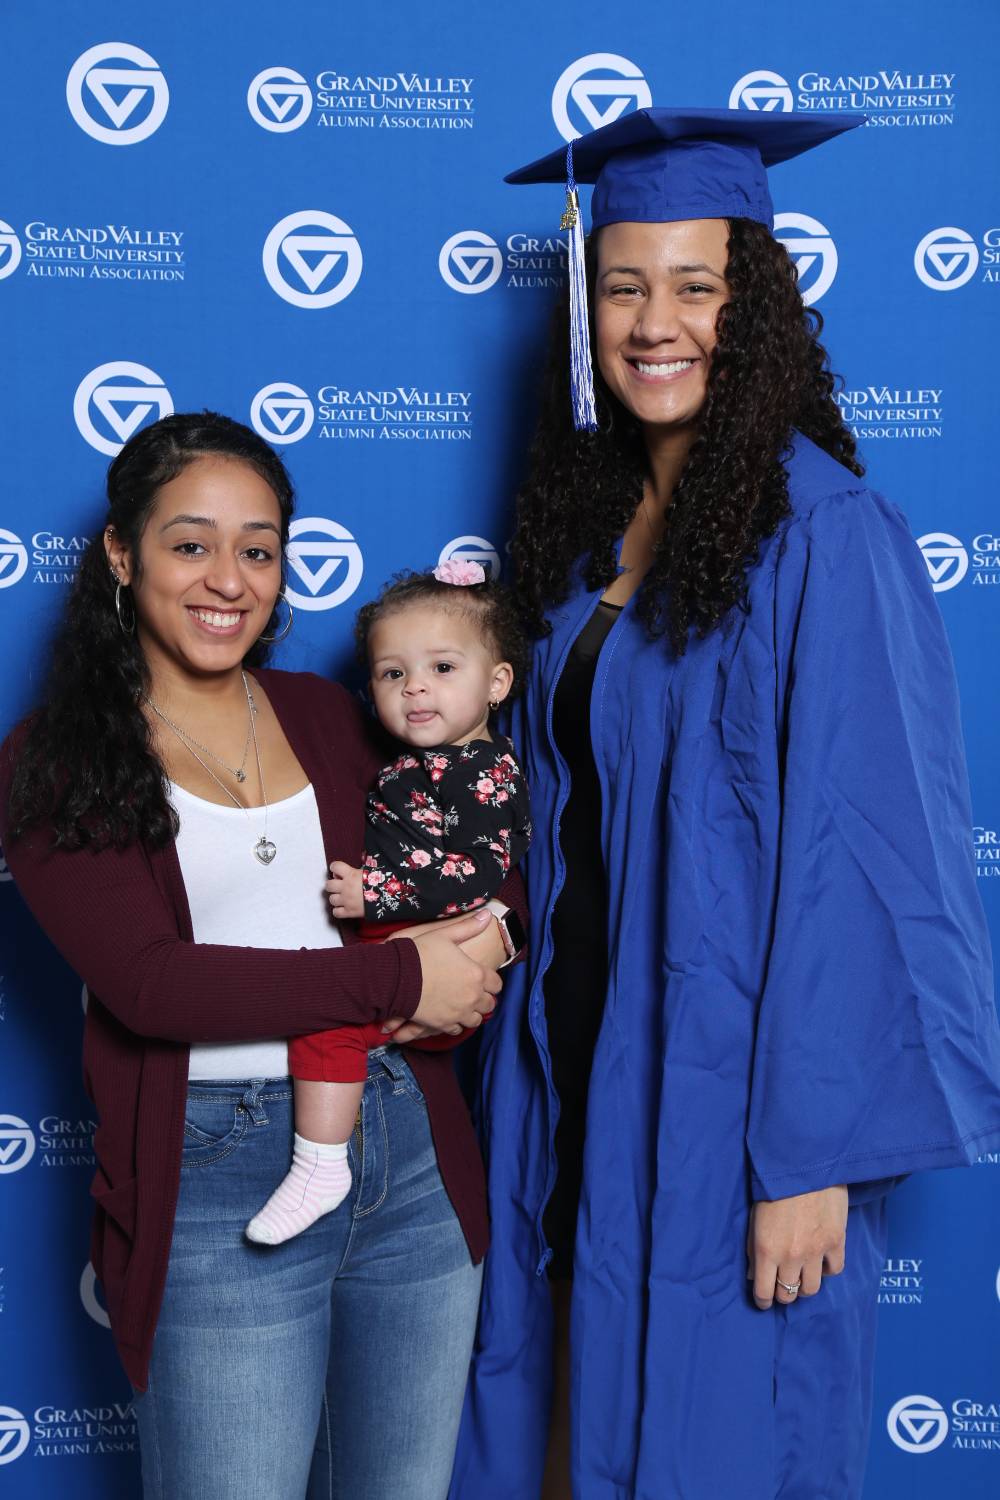 A future alumna poses with family at GradFest